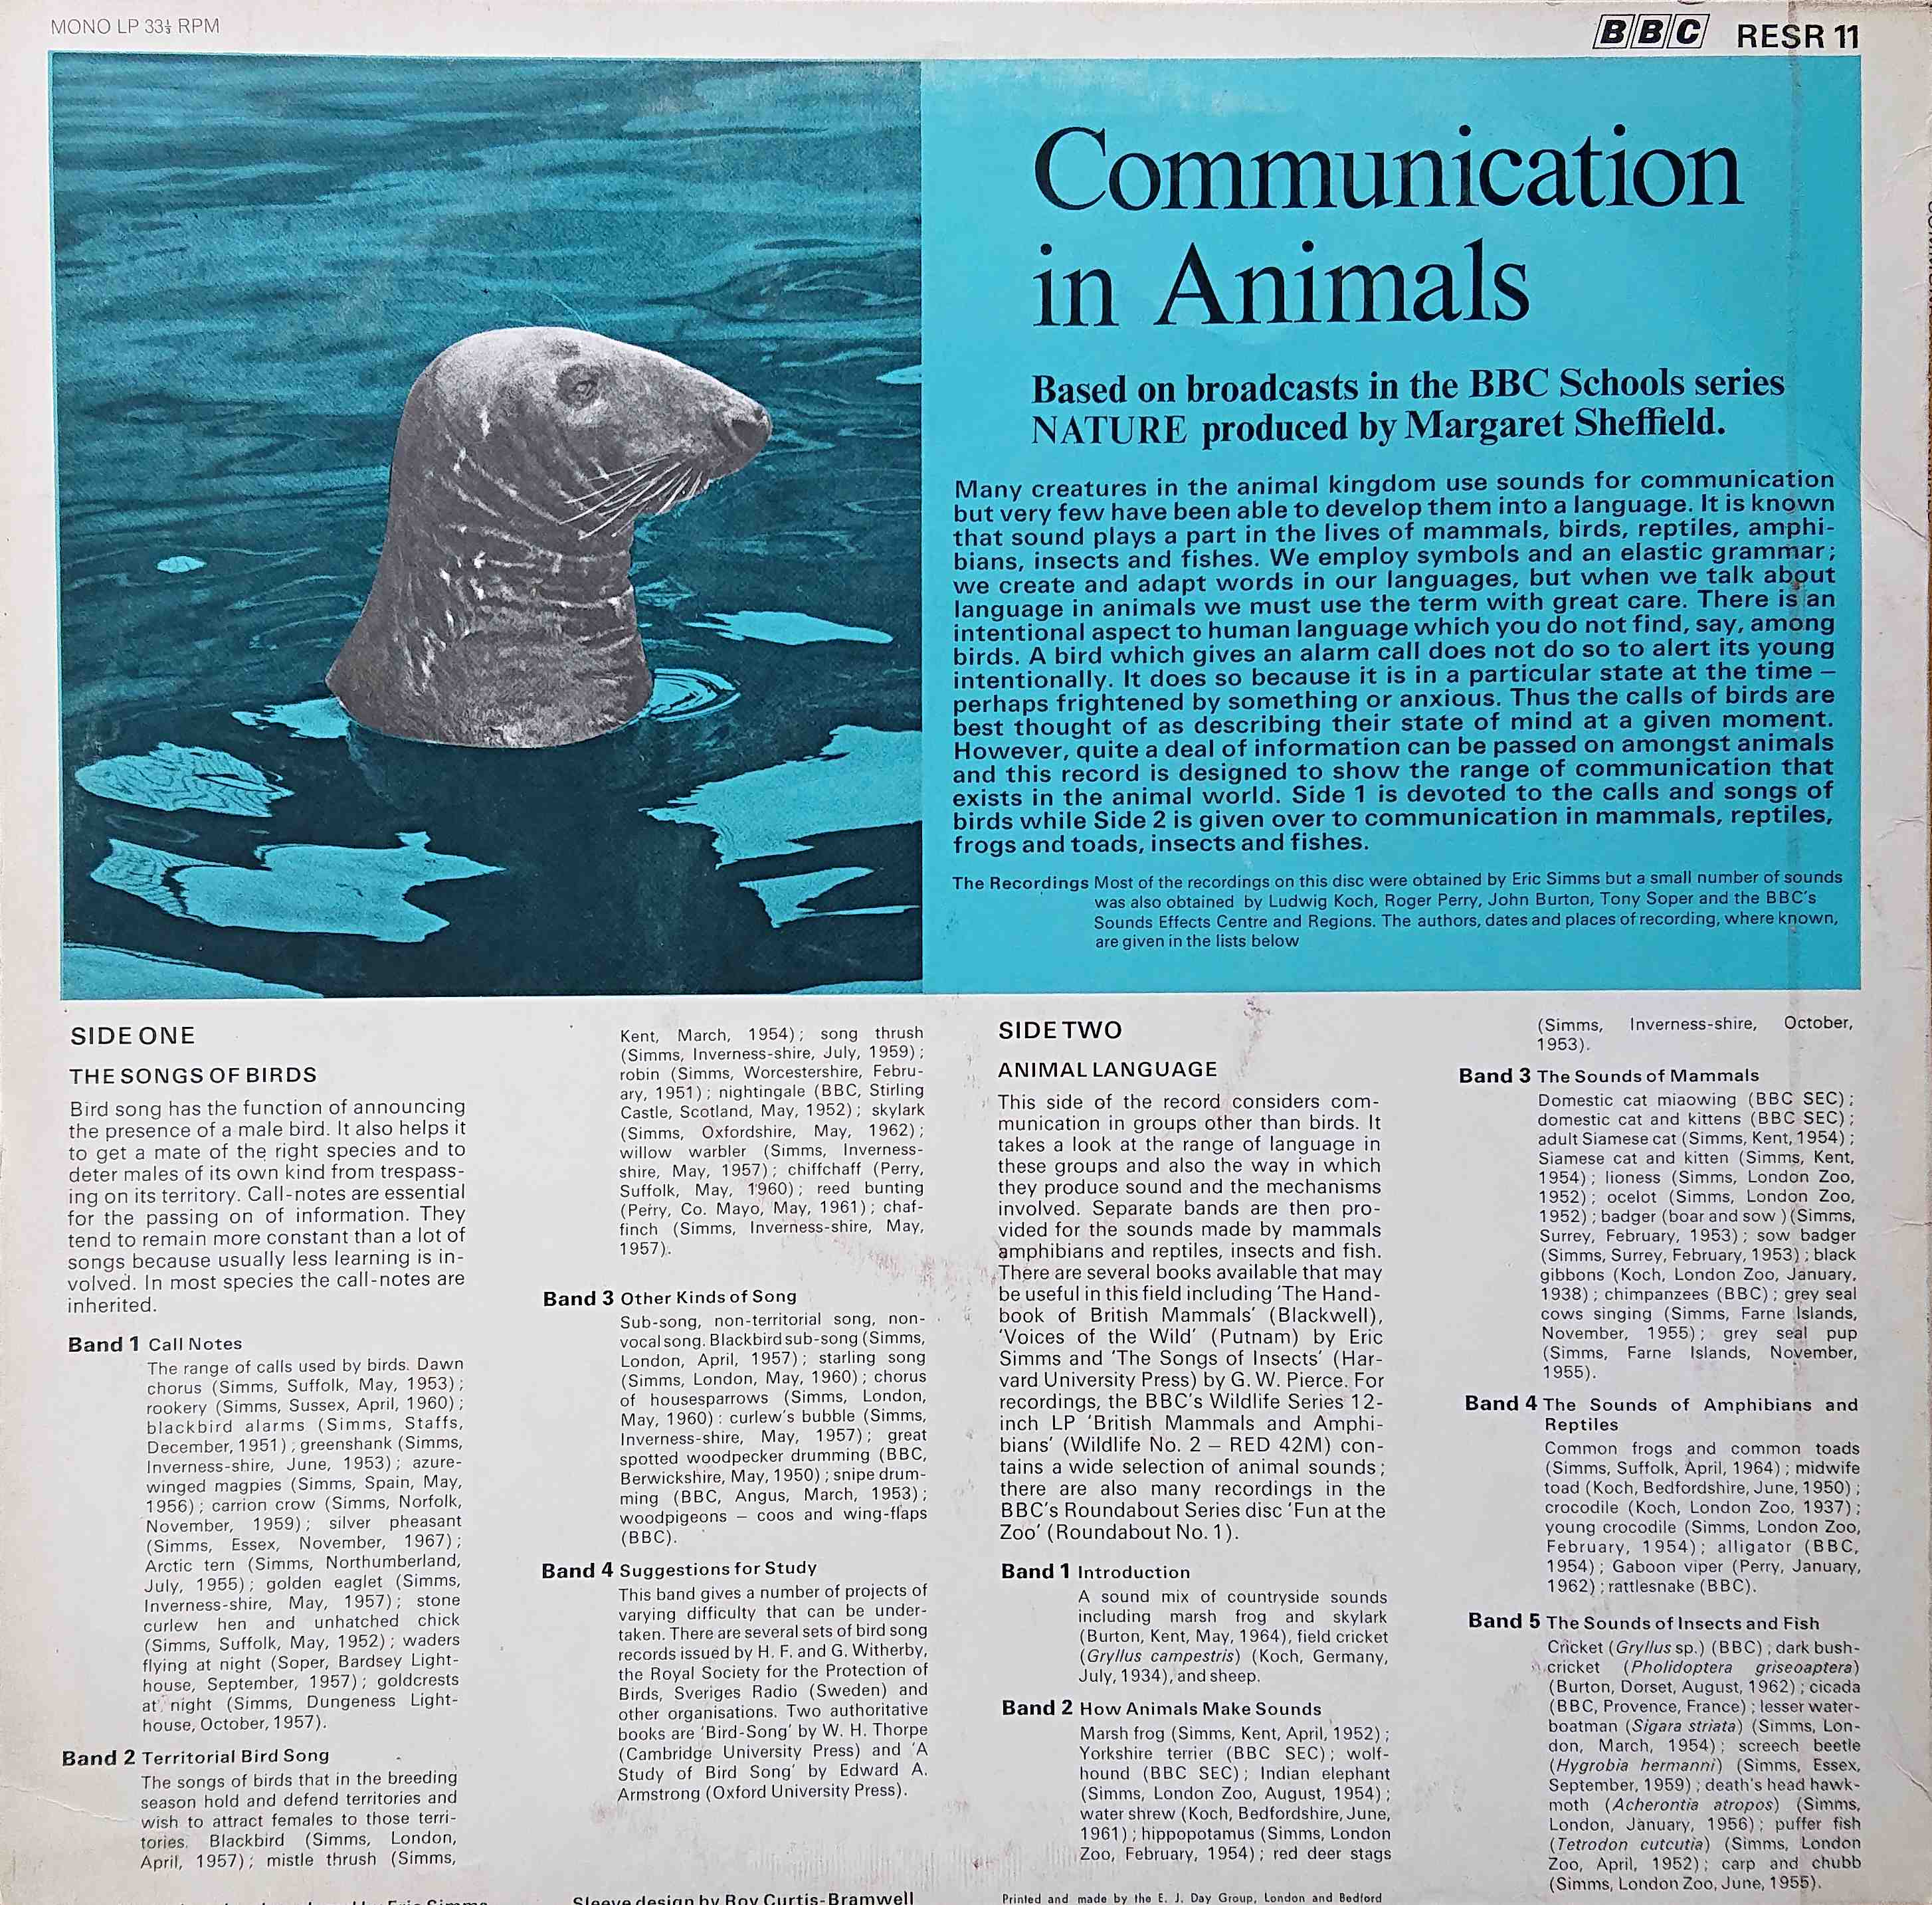 Picture of RESR 11 Communication in animals by artist Eric Simms from the BBC records and Tapes library